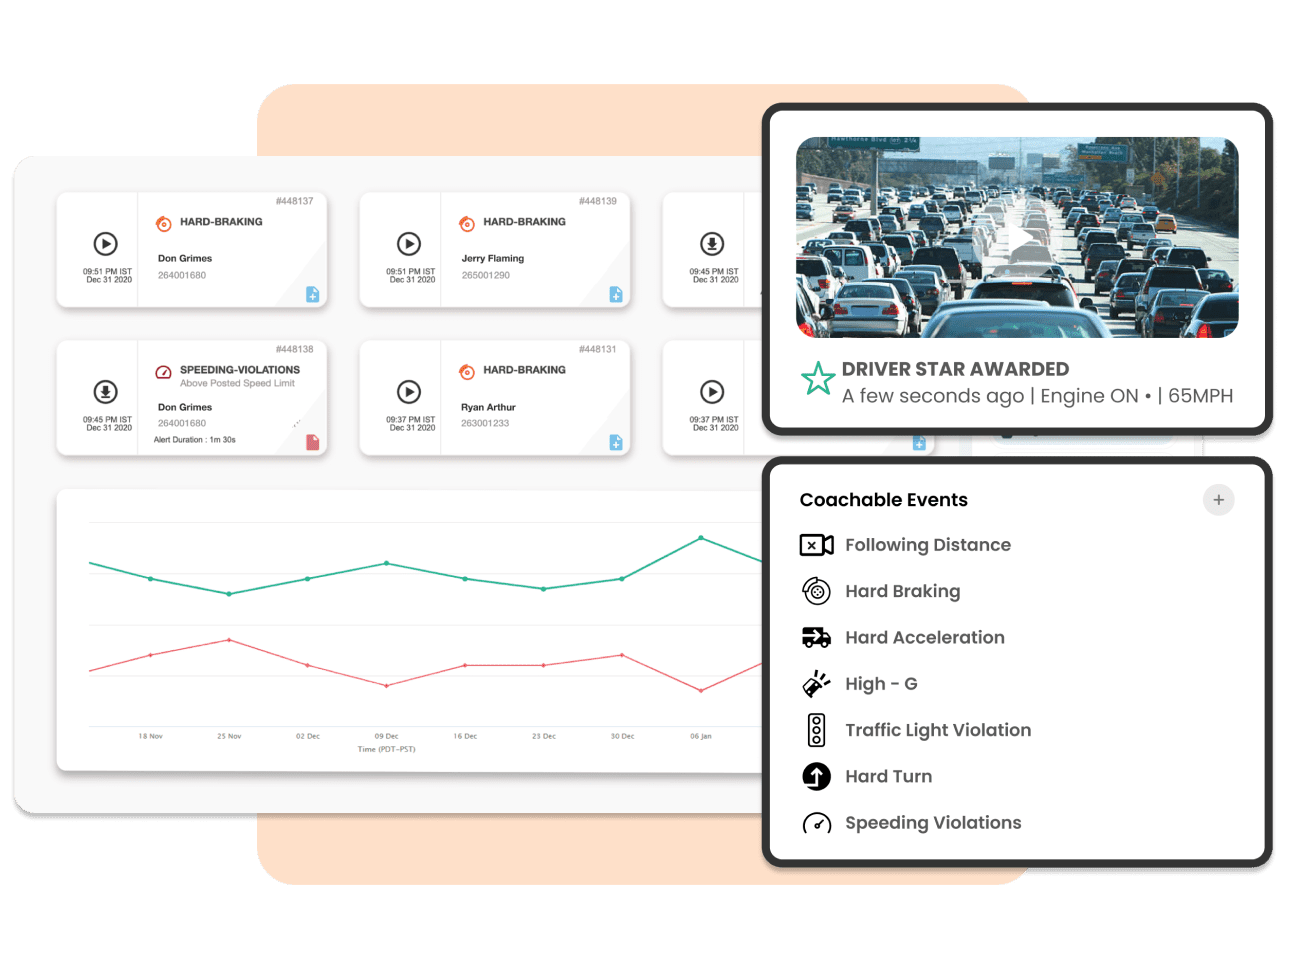 Fleet manager dashboard with fleet analytics. Engage with drivers and coach them faster